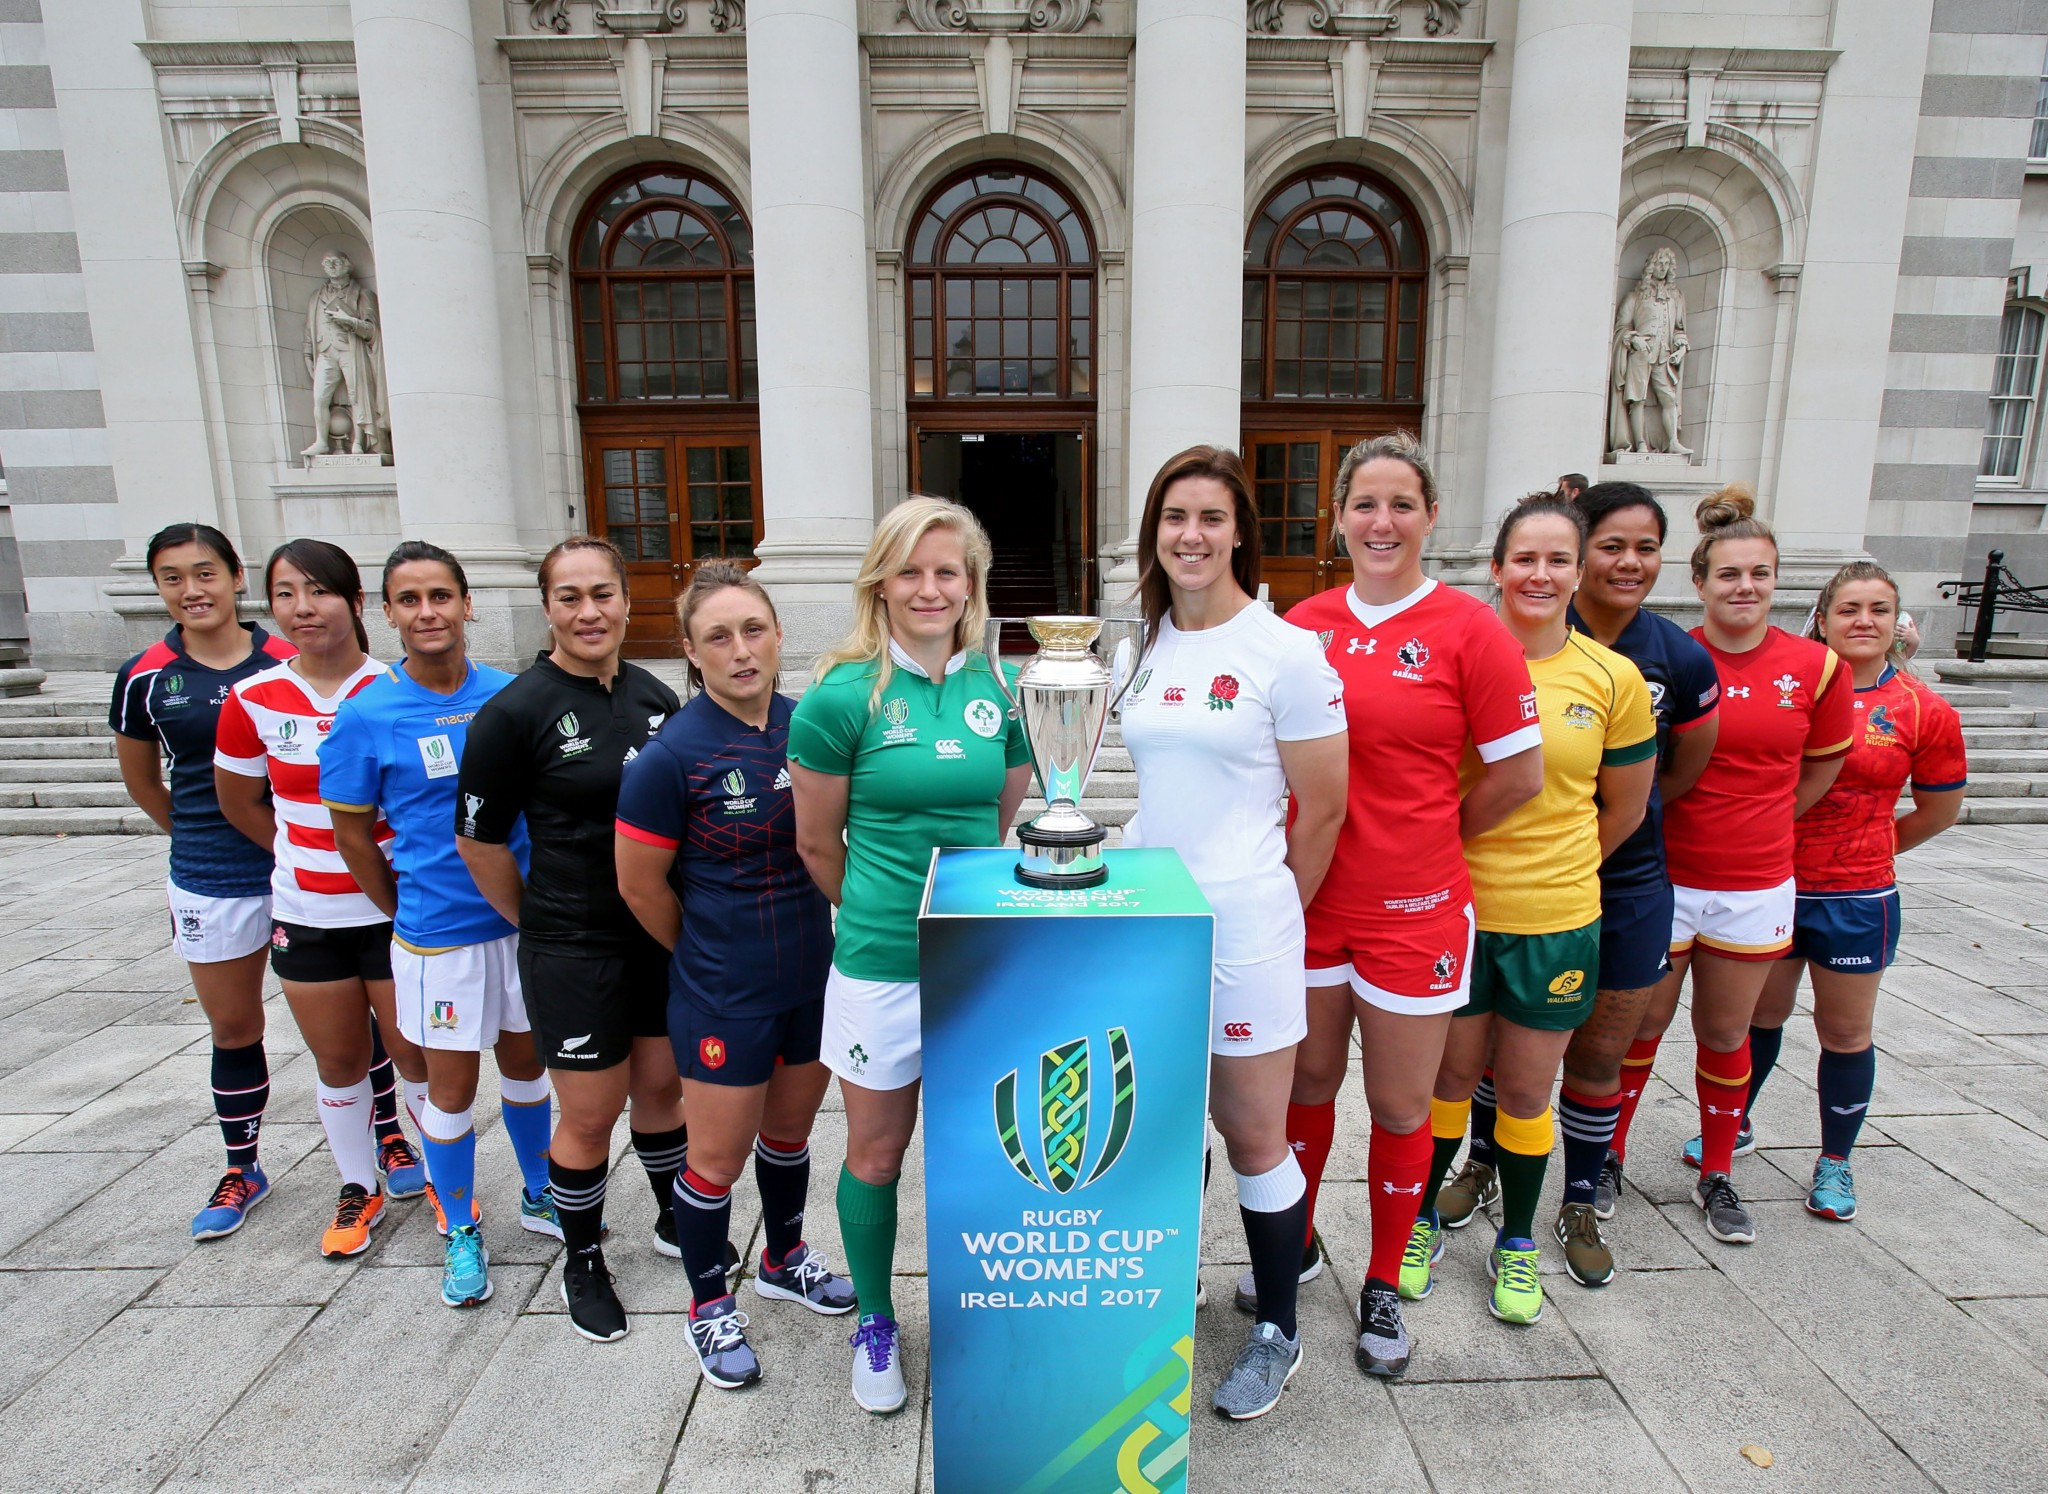 Leadership forum being held in Belfast to coincide with Women’s Rugby World Cup